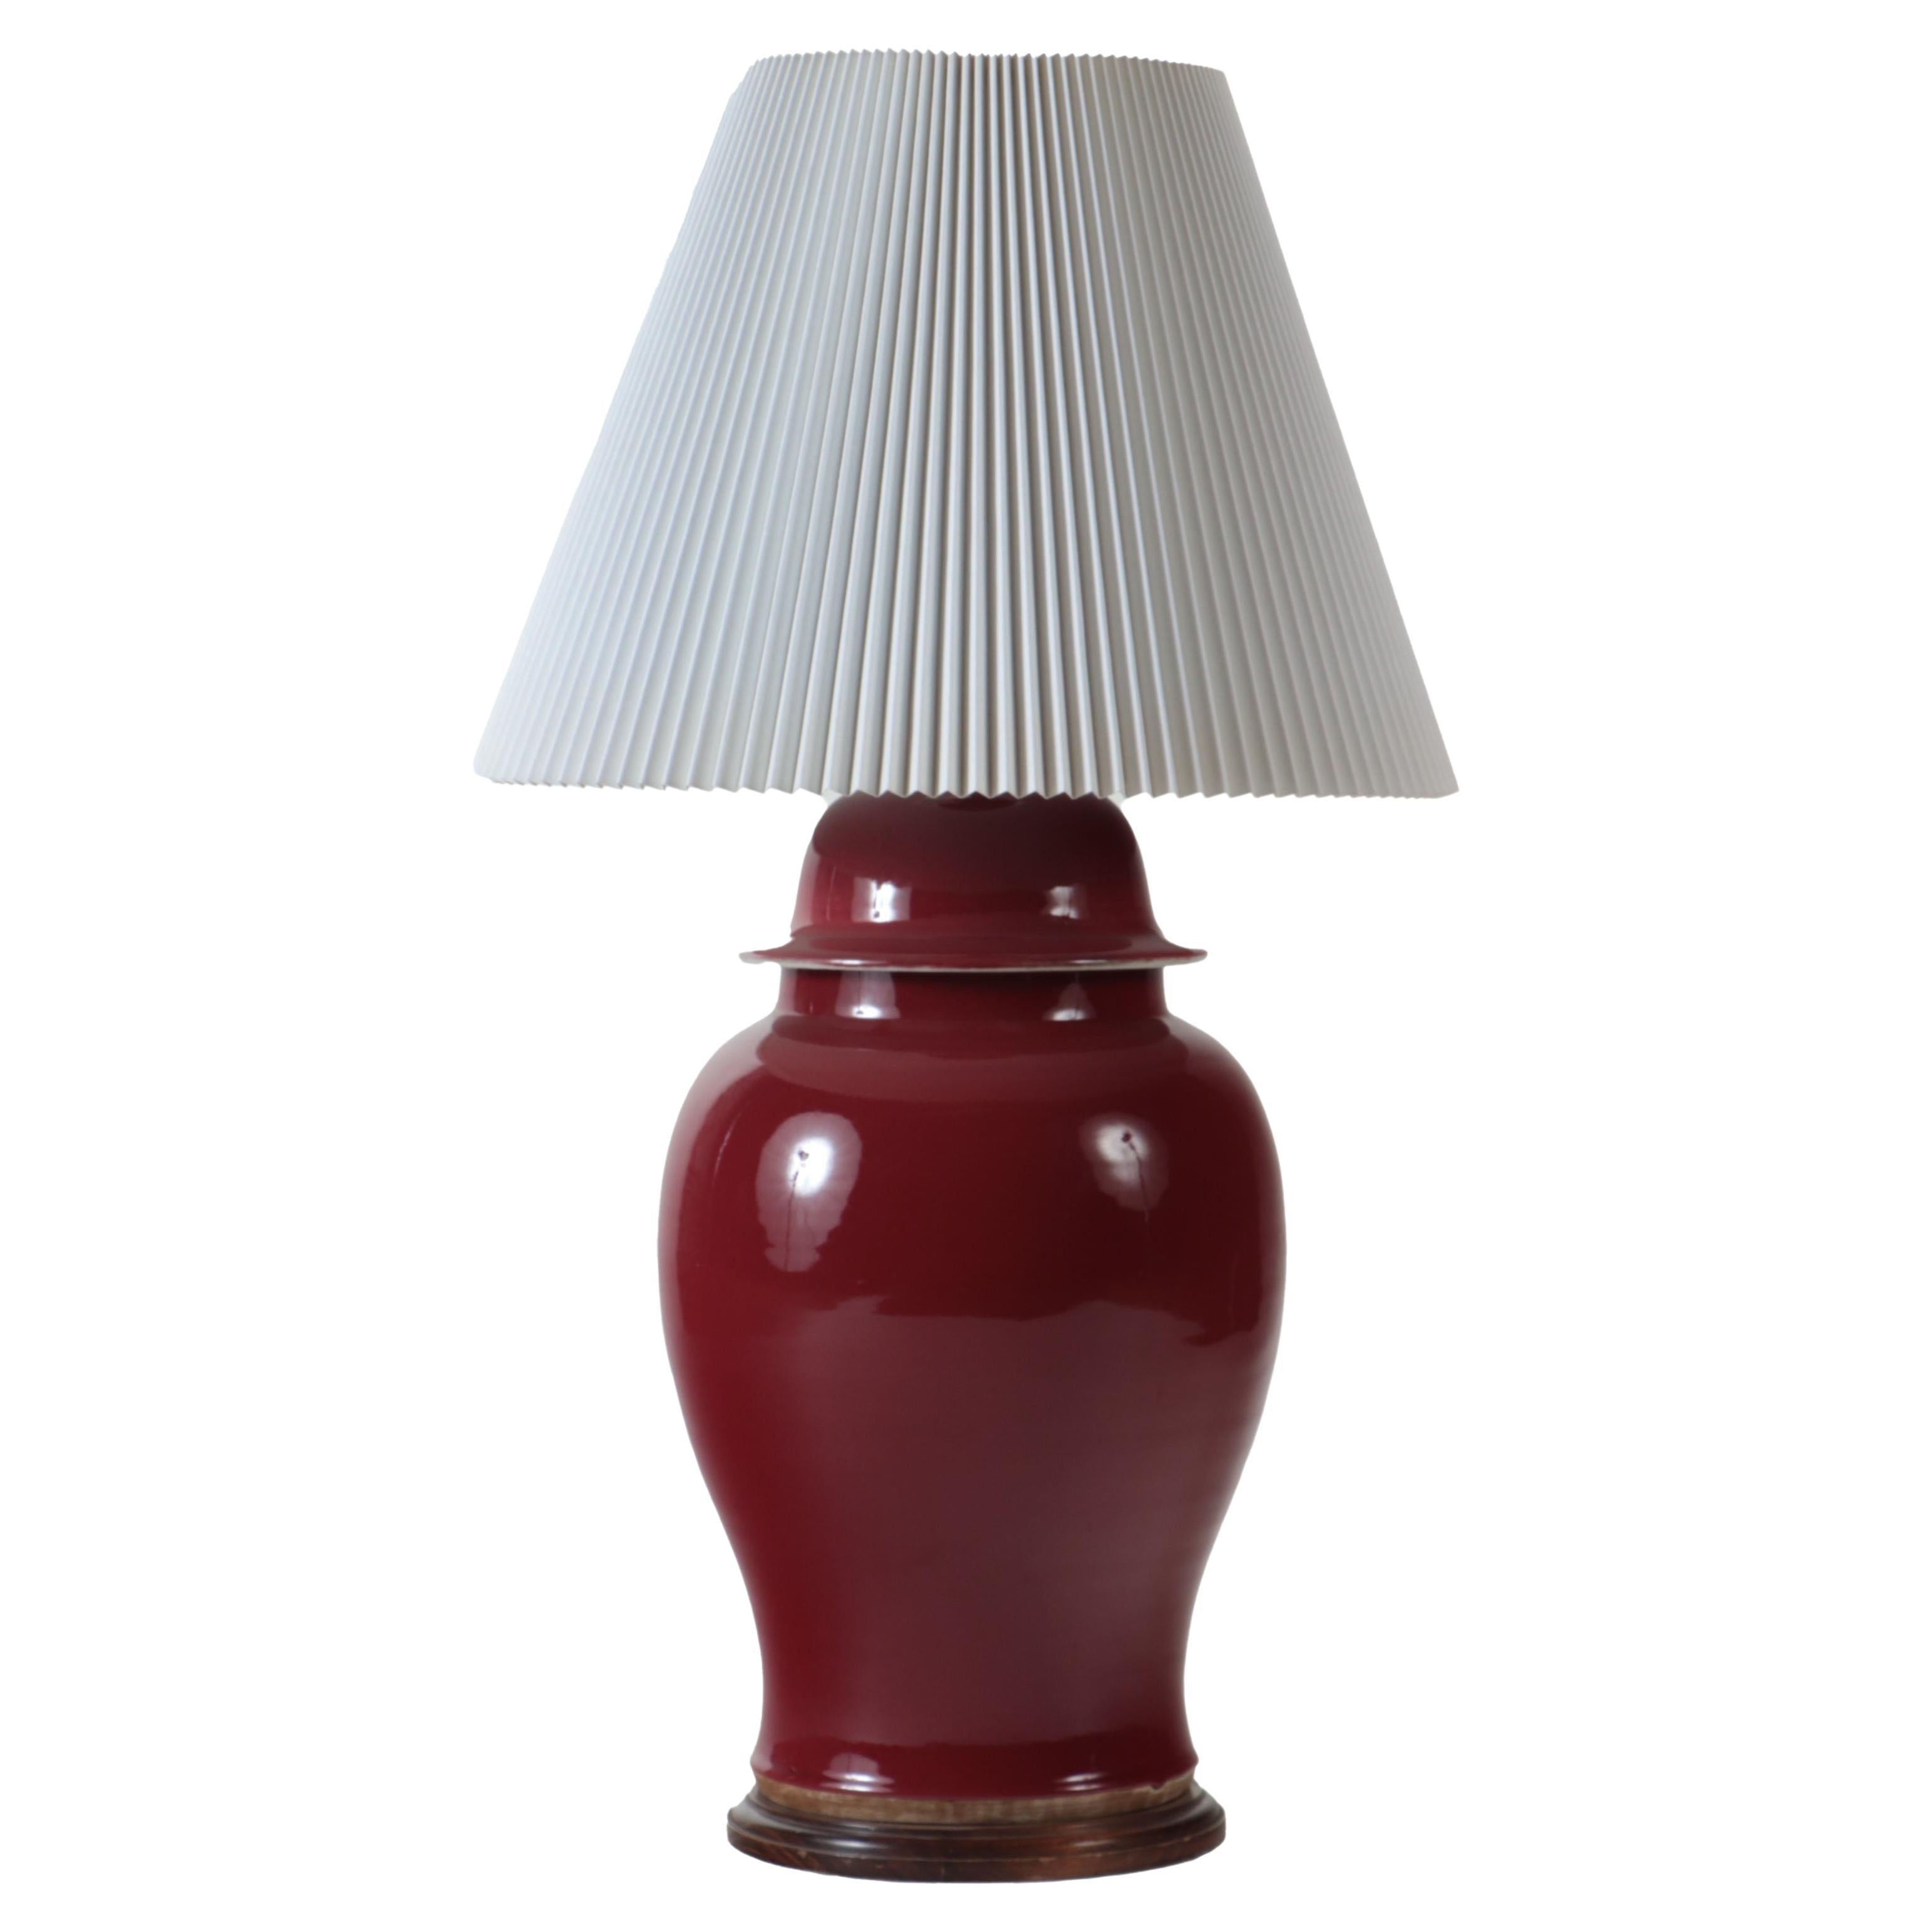 Oxblood Vase Table Lamp on Wooden Base, circa 1970s